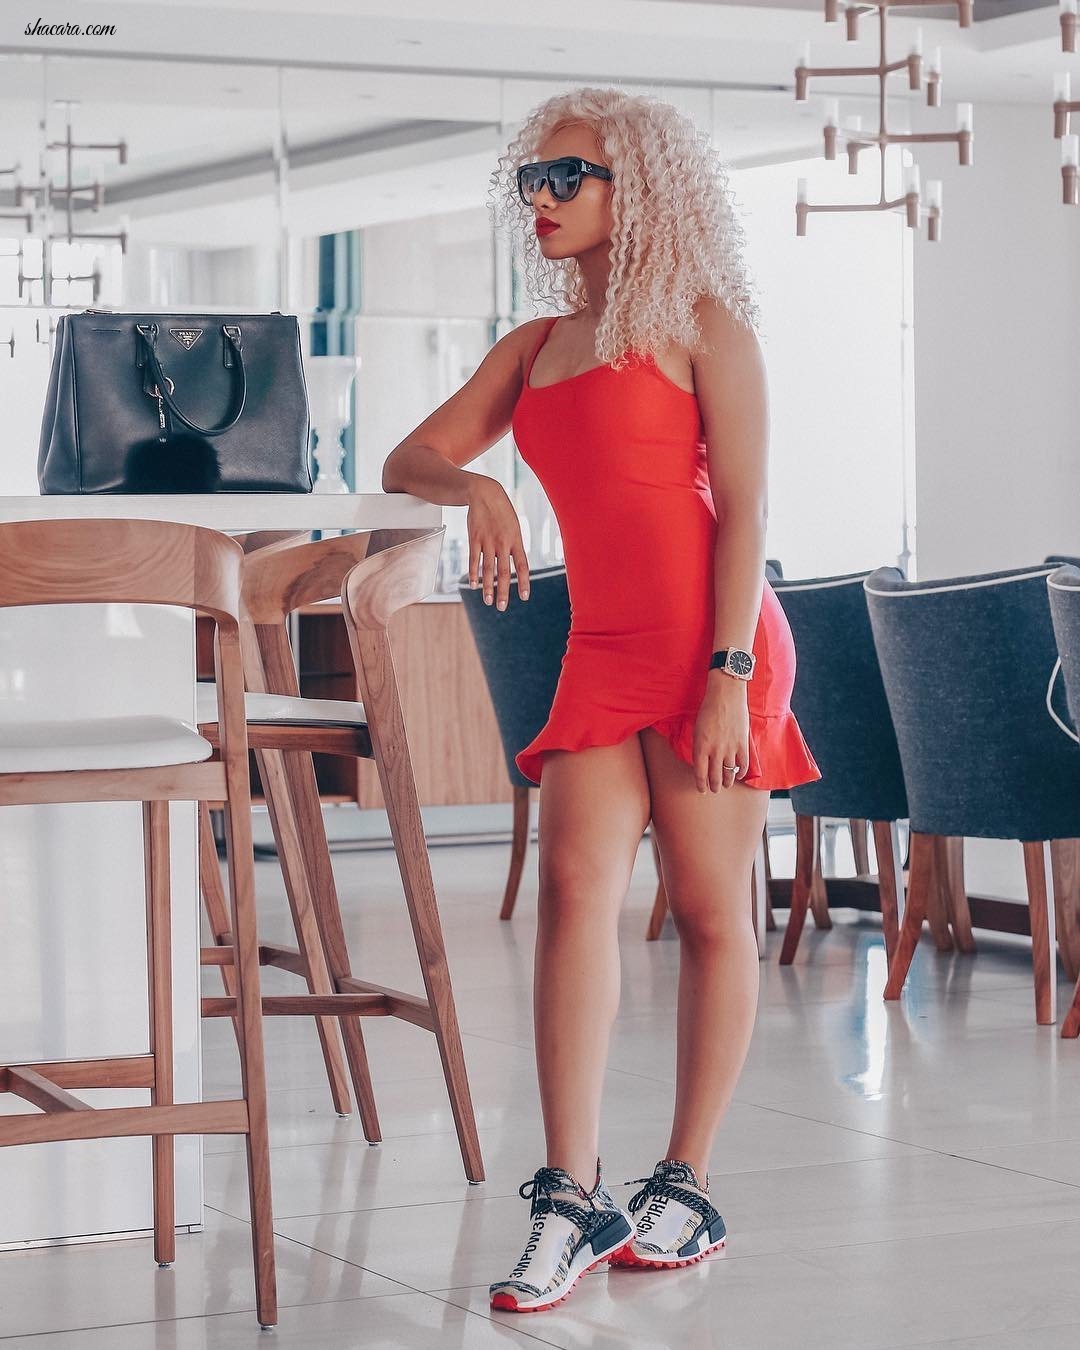 Looking For A Date Night Outfit? — Let Amanda Du-Pont Be Your Style Inspiration